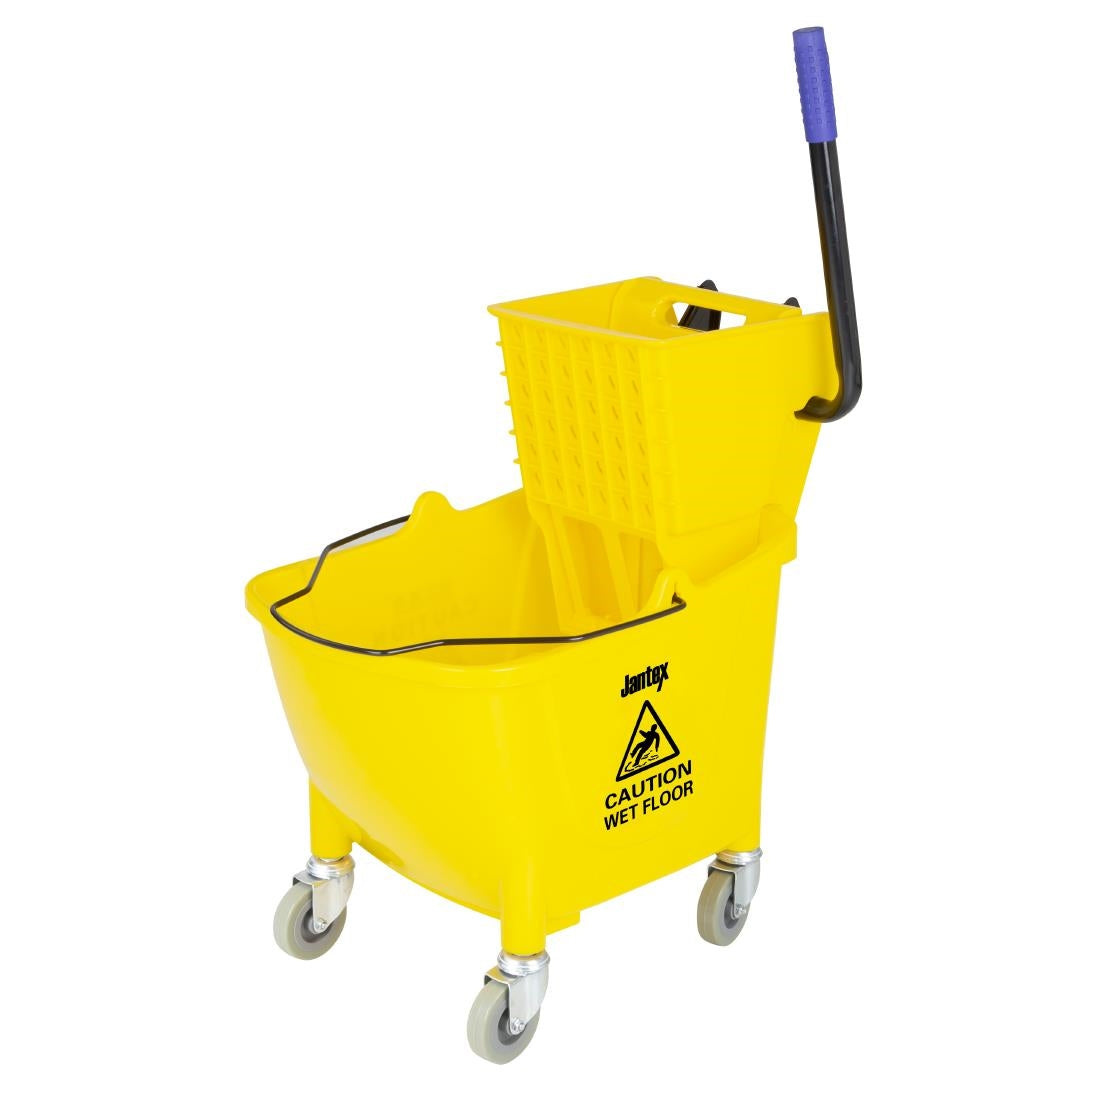 Jantex 30ltr Mop Bucket with Foot Pedal release - Yellow